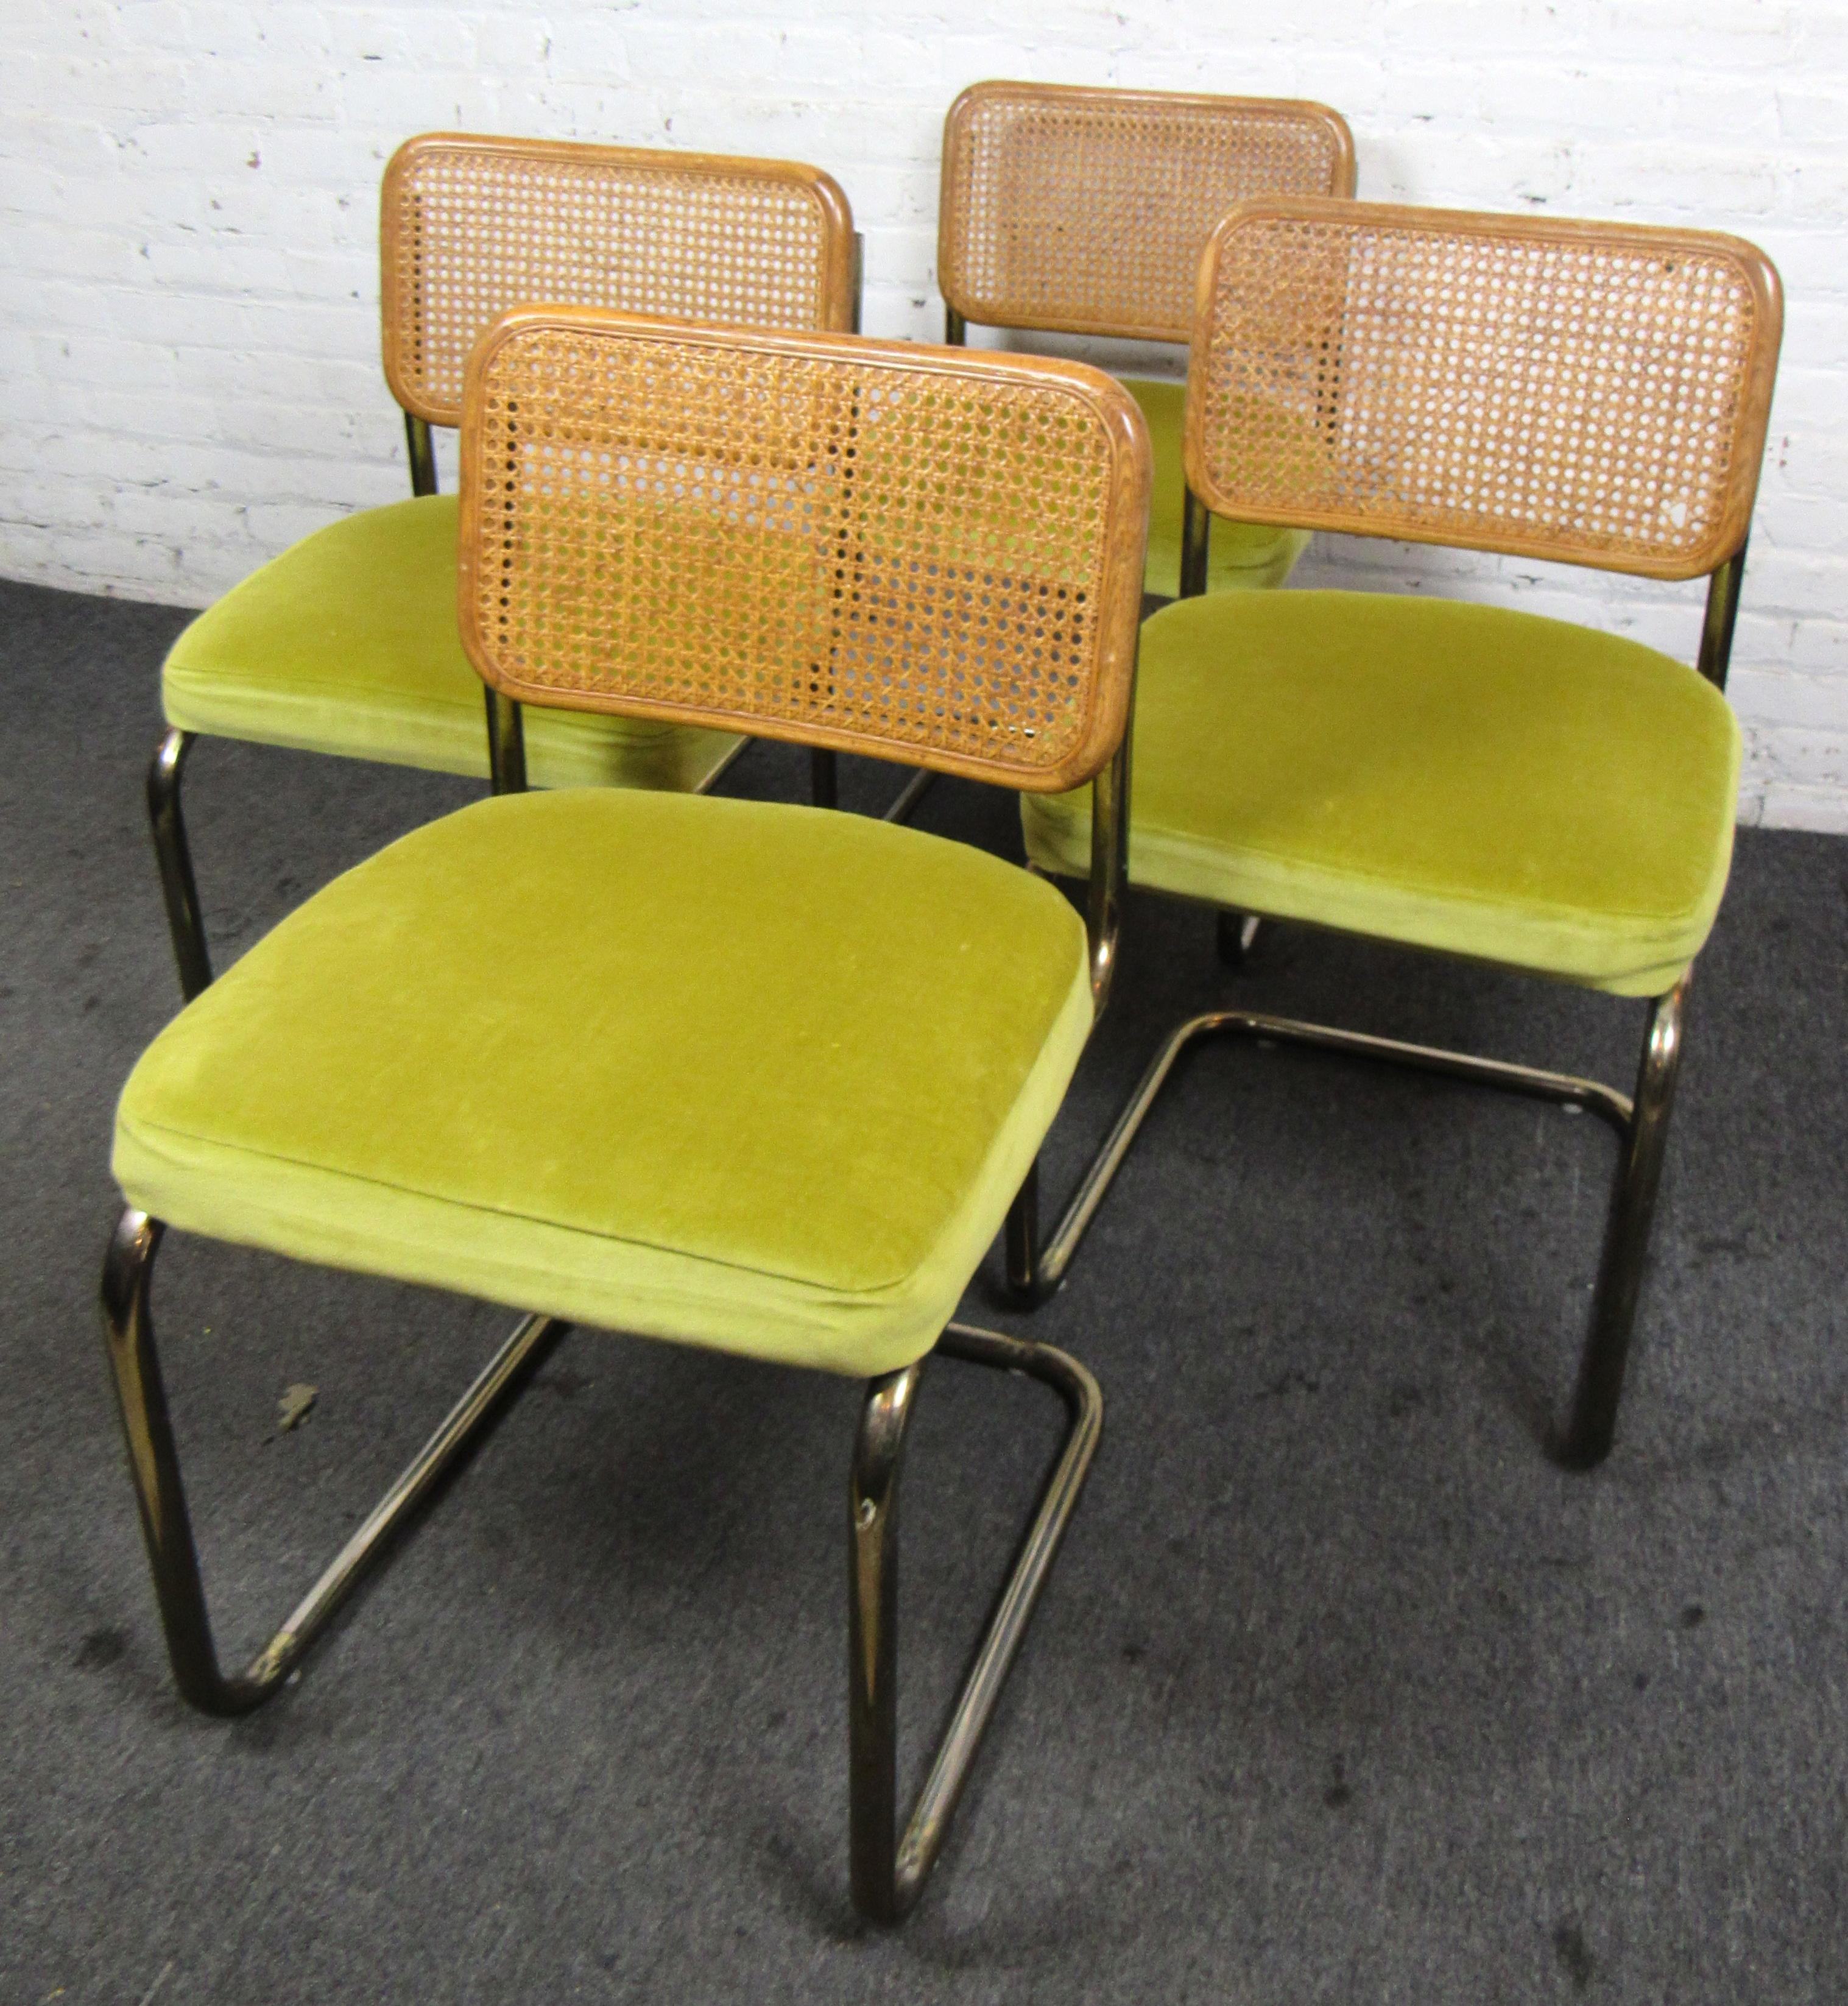 Cesca chairs by Marcel Breuer with cantilever metal frames and cane backs. Comfortable upholstered seats for dining or living room use.
(Please confirm location NY of NJ).